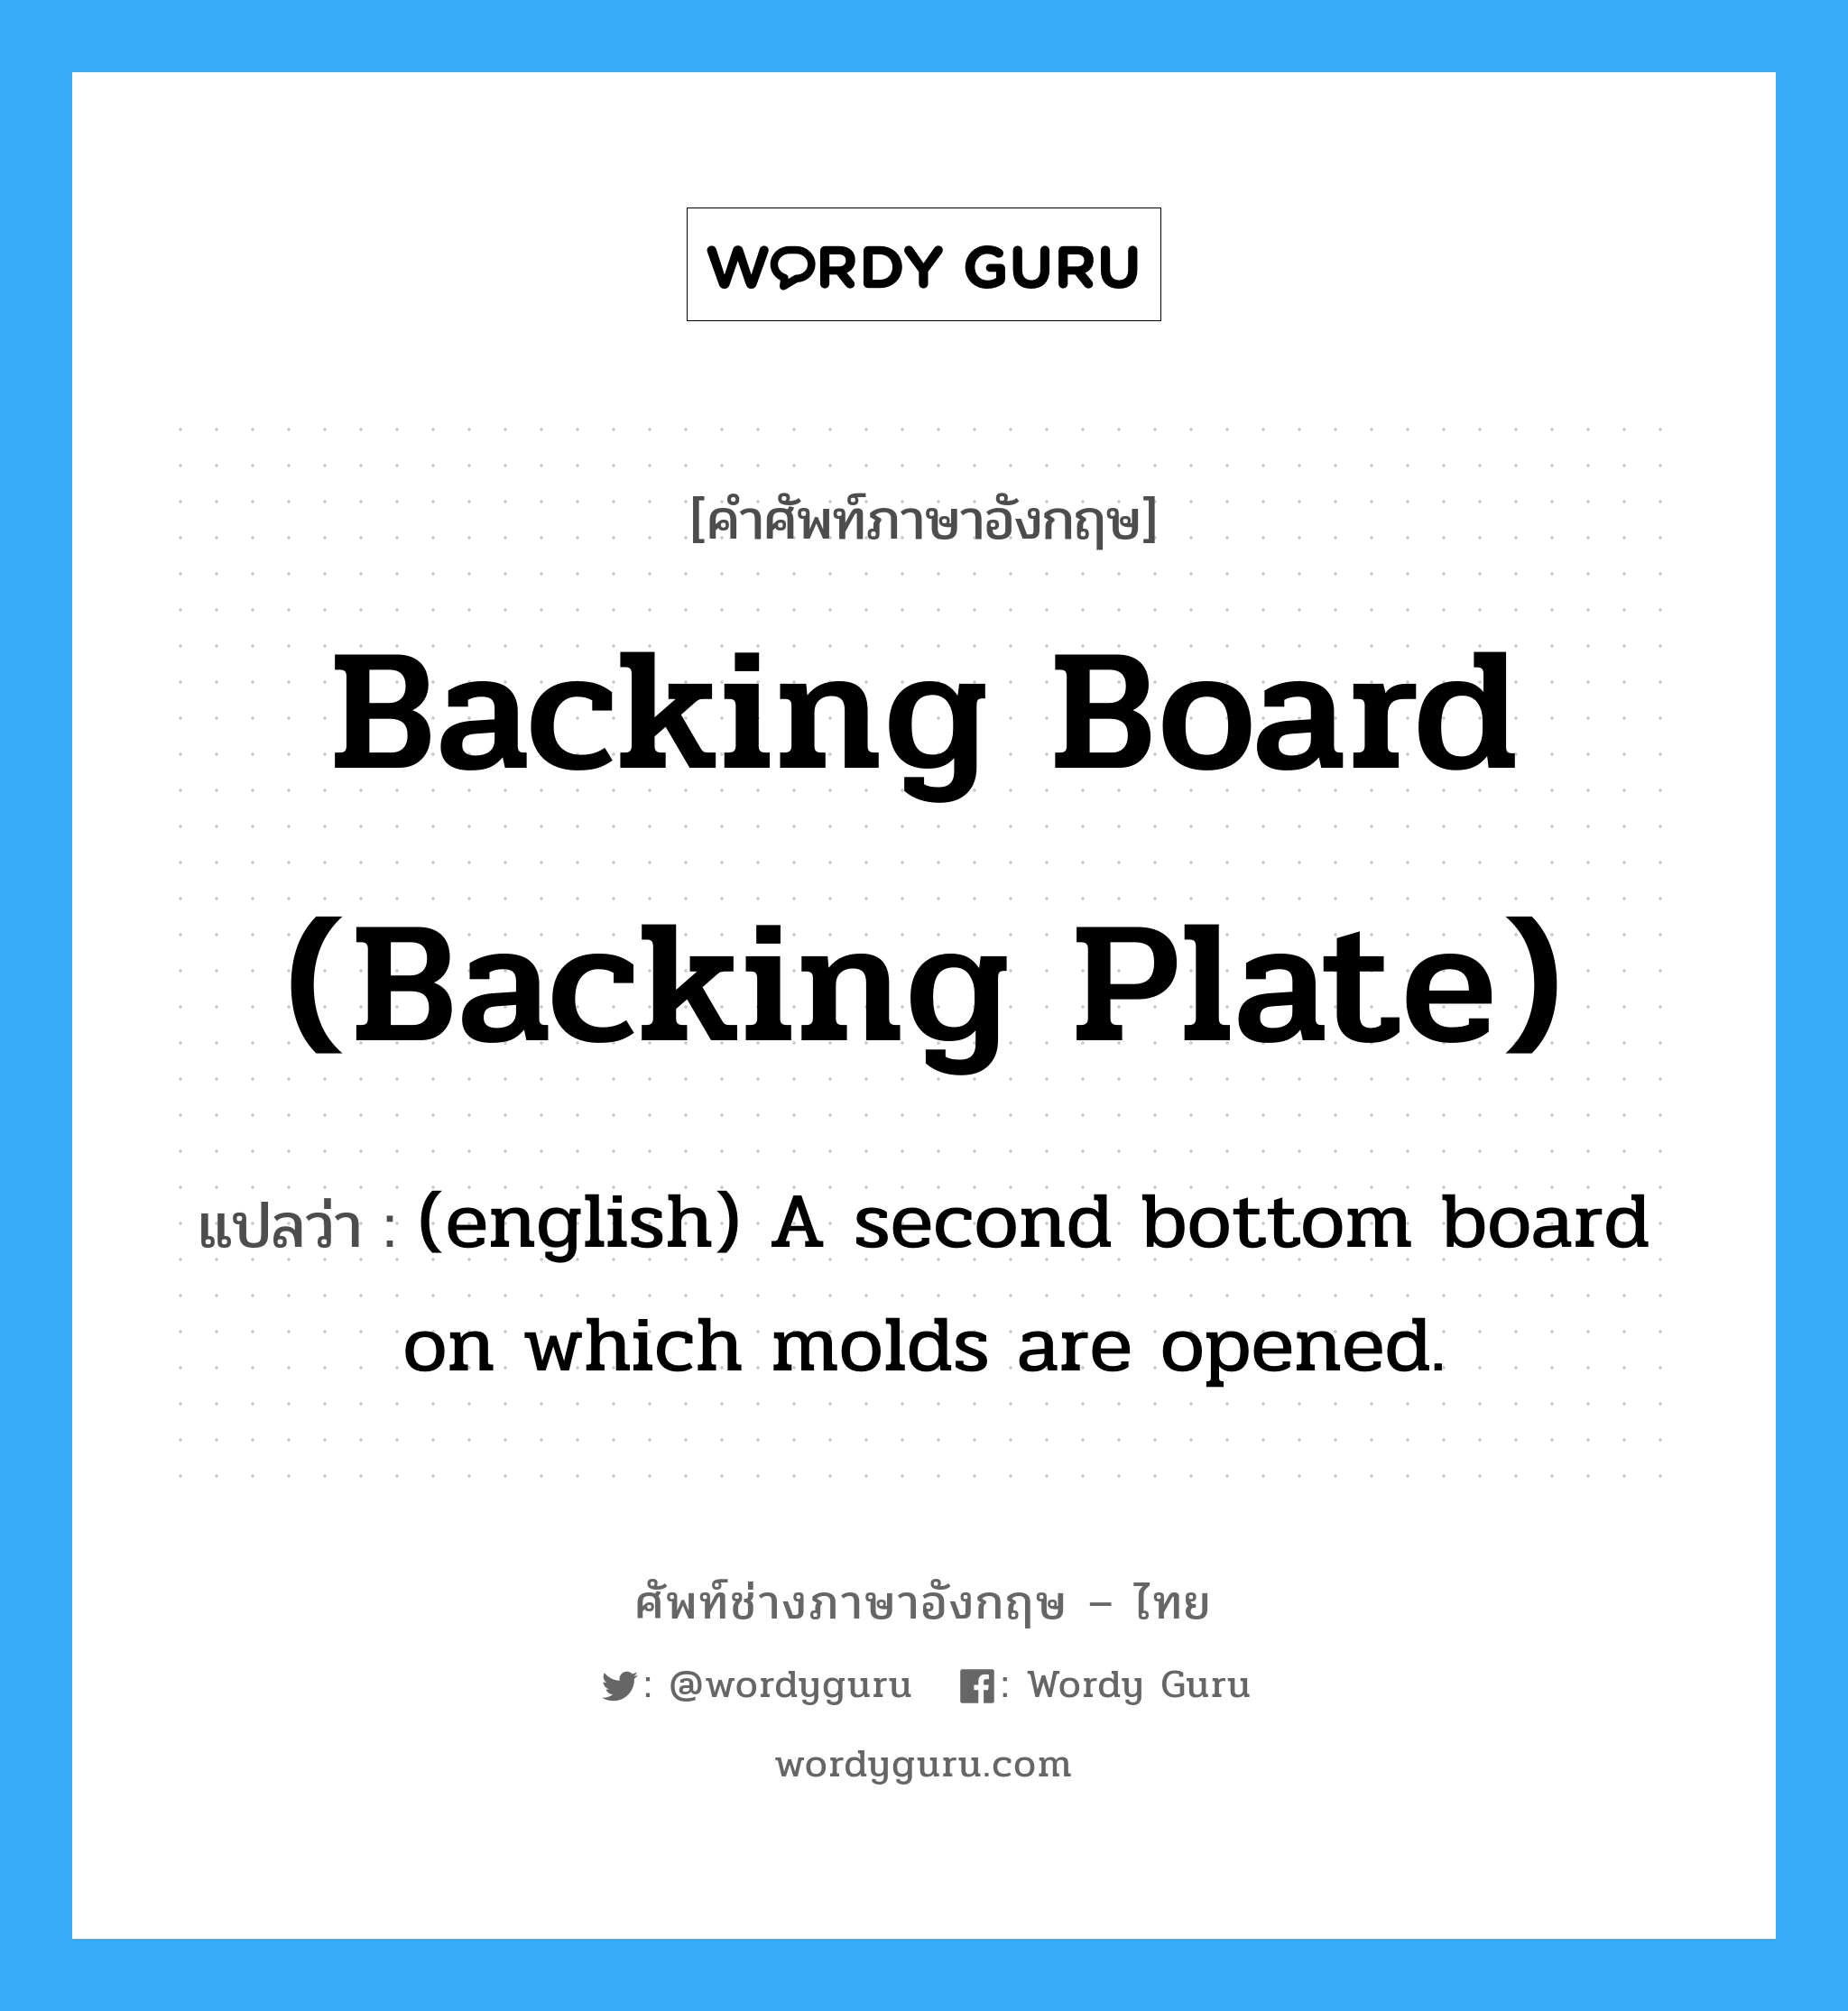 (english) A second bottom board on which molds are opened. ภาษาอังกฤษ?, คำศัพท์ช่างภาษาอังกฤษ - ไทย (english) A second bottom board on which molds are opened. คำศัพท์ภาษาอังกฤษ (english) A second bottom board on which molds are opened. แปลว่า Backing Board (Backing Plate)